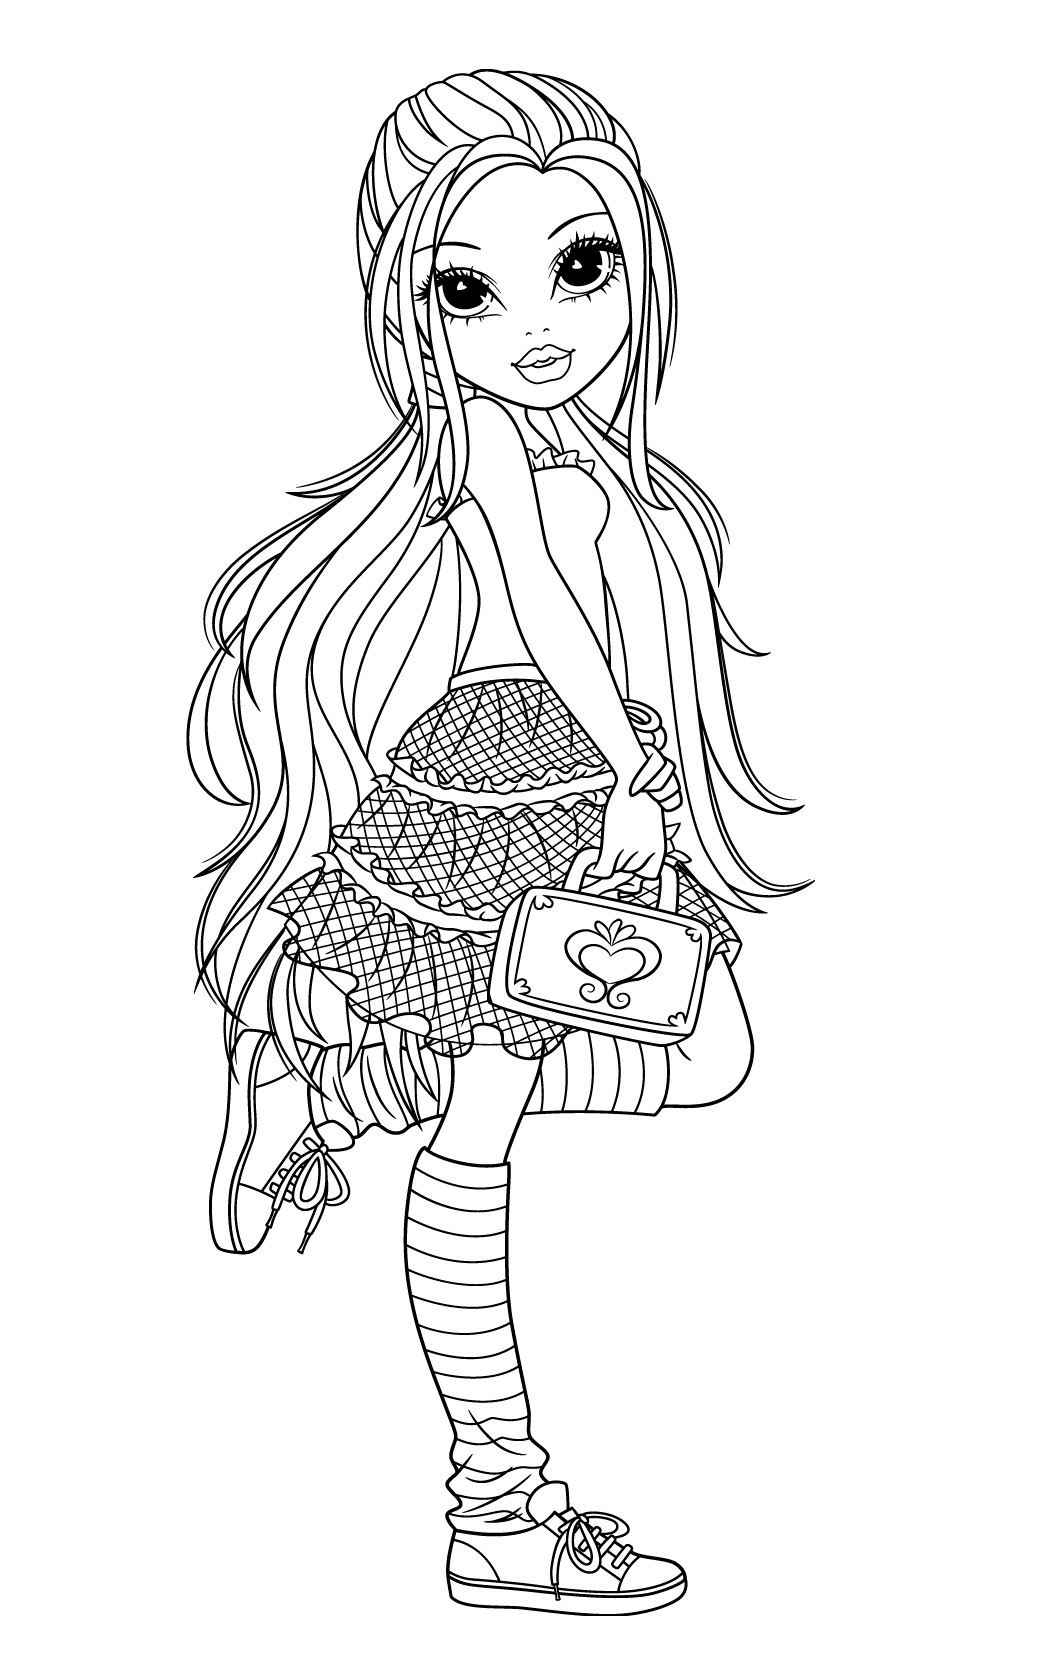 Coloring Pages For Girls Online
 New Moxie Girlz Coloring Pages will be added frequently so